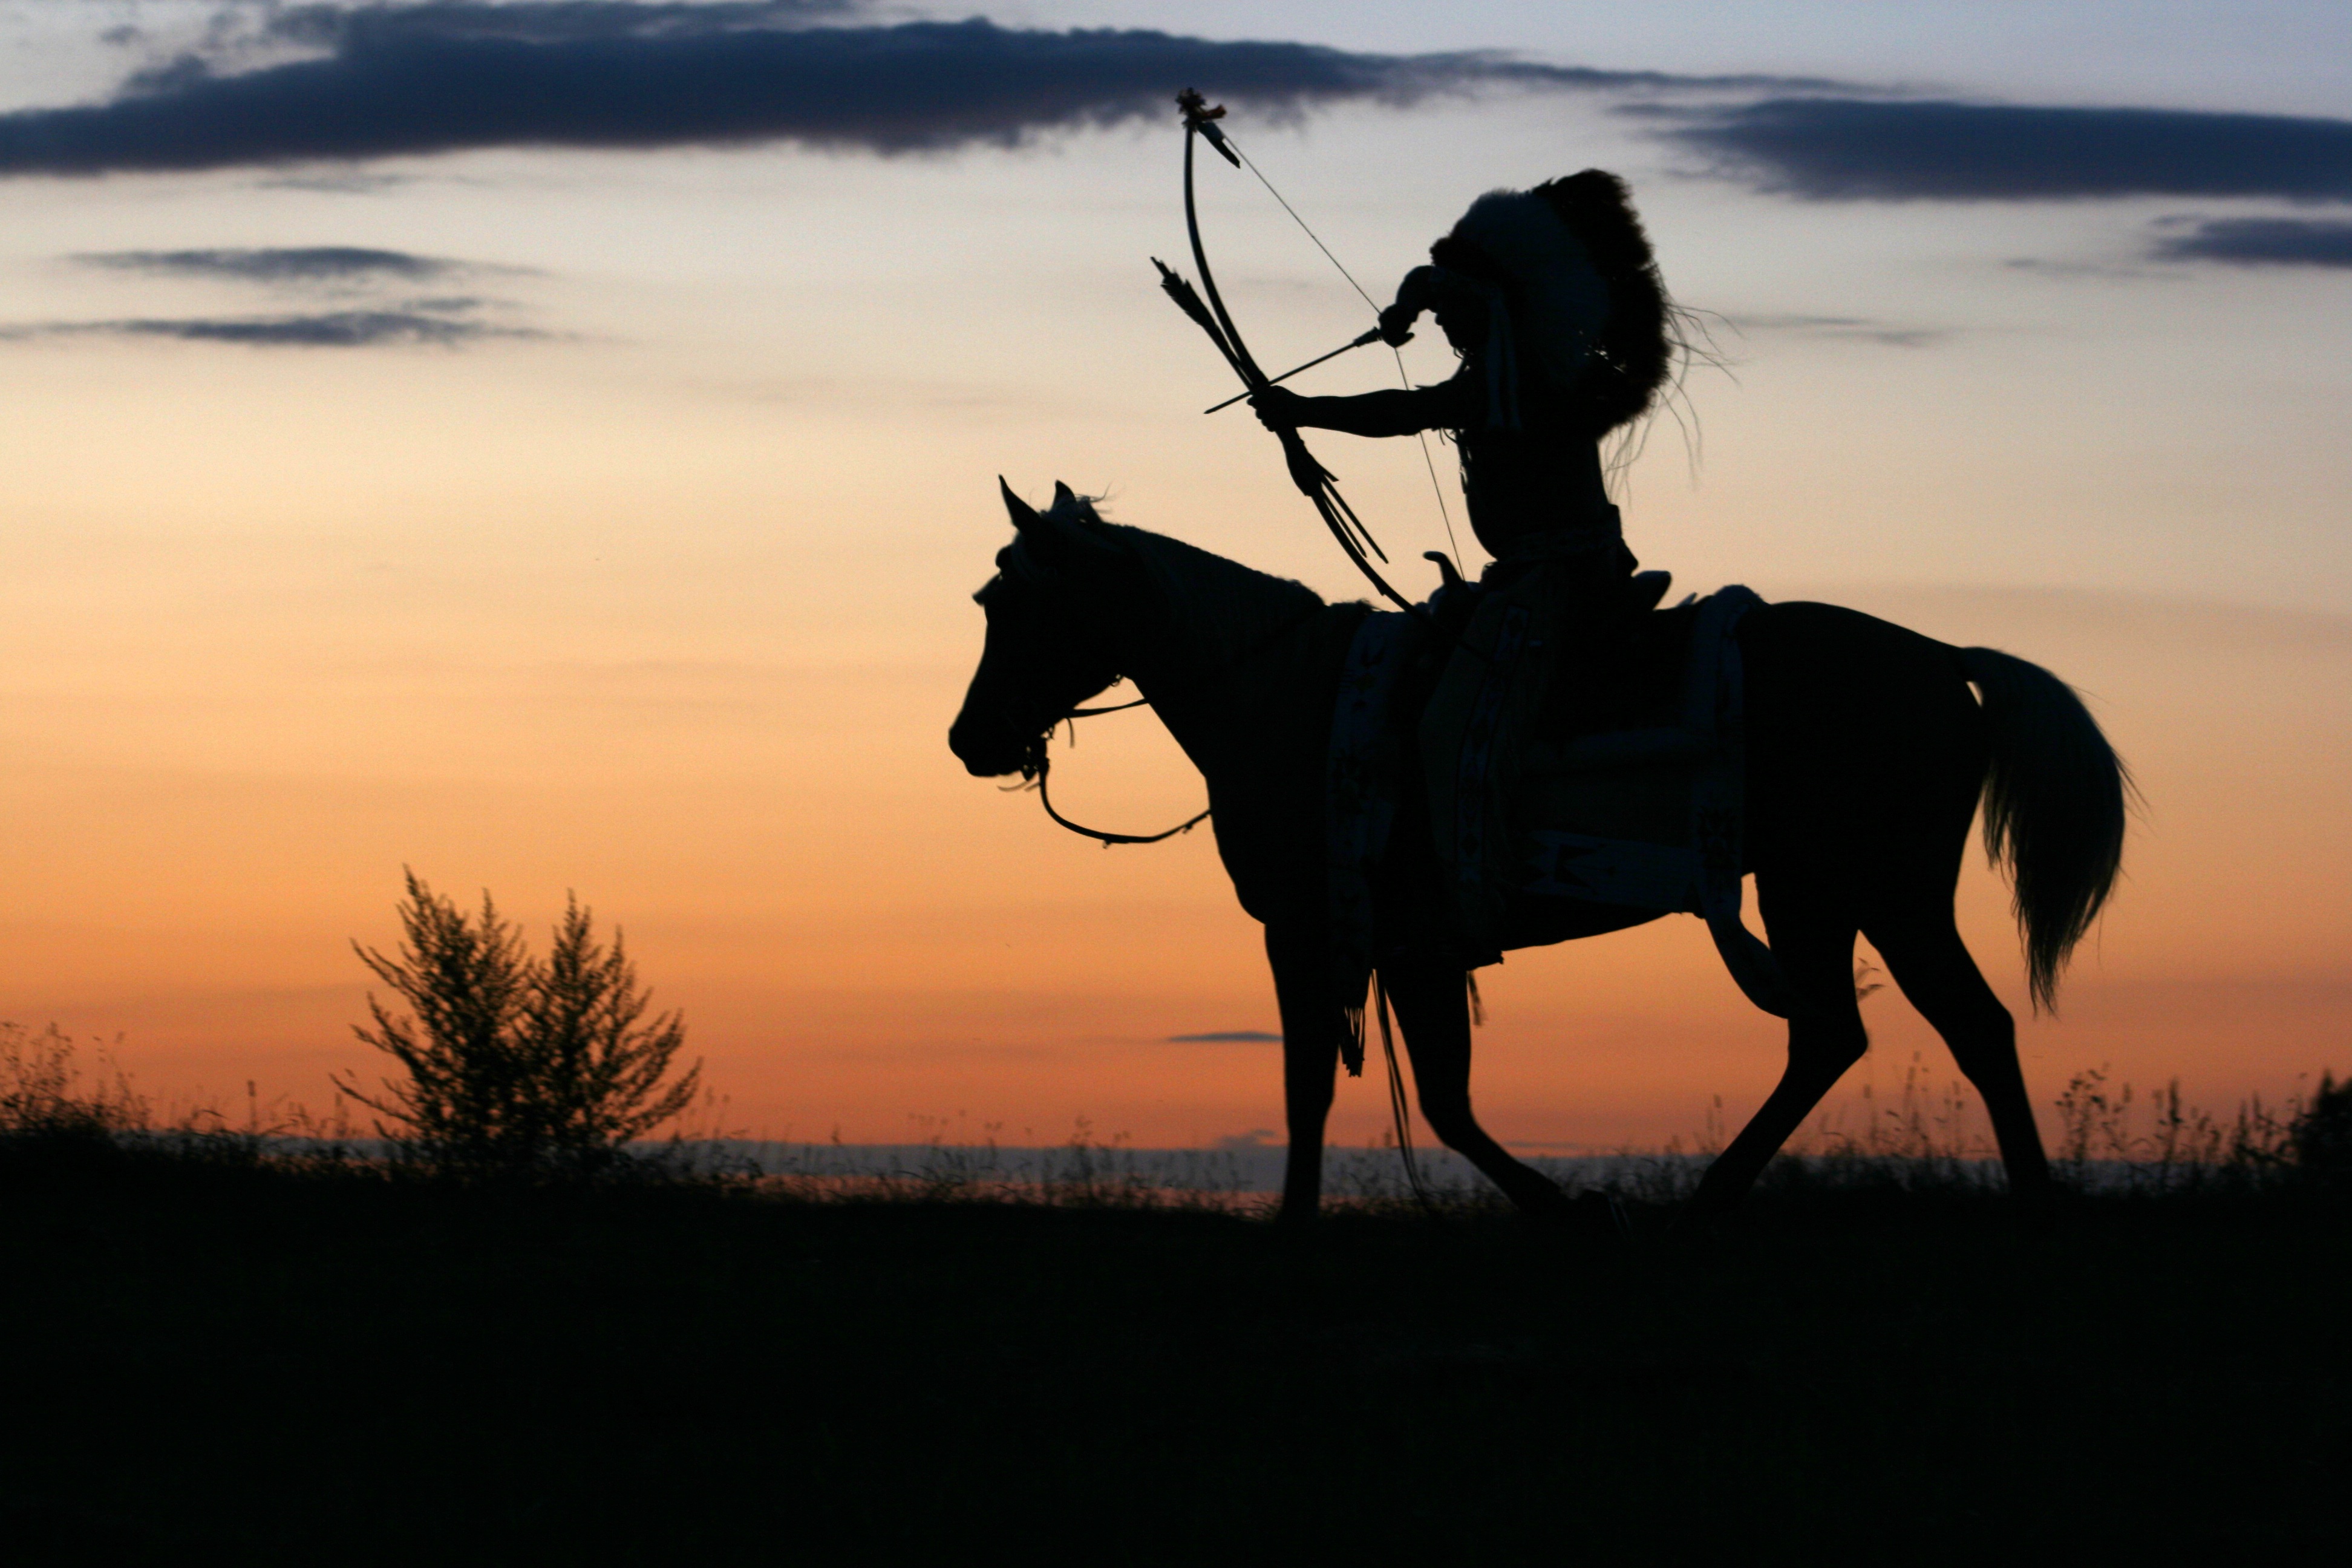 Silhouette of a Native American in the sunset by Tomasz Proszek